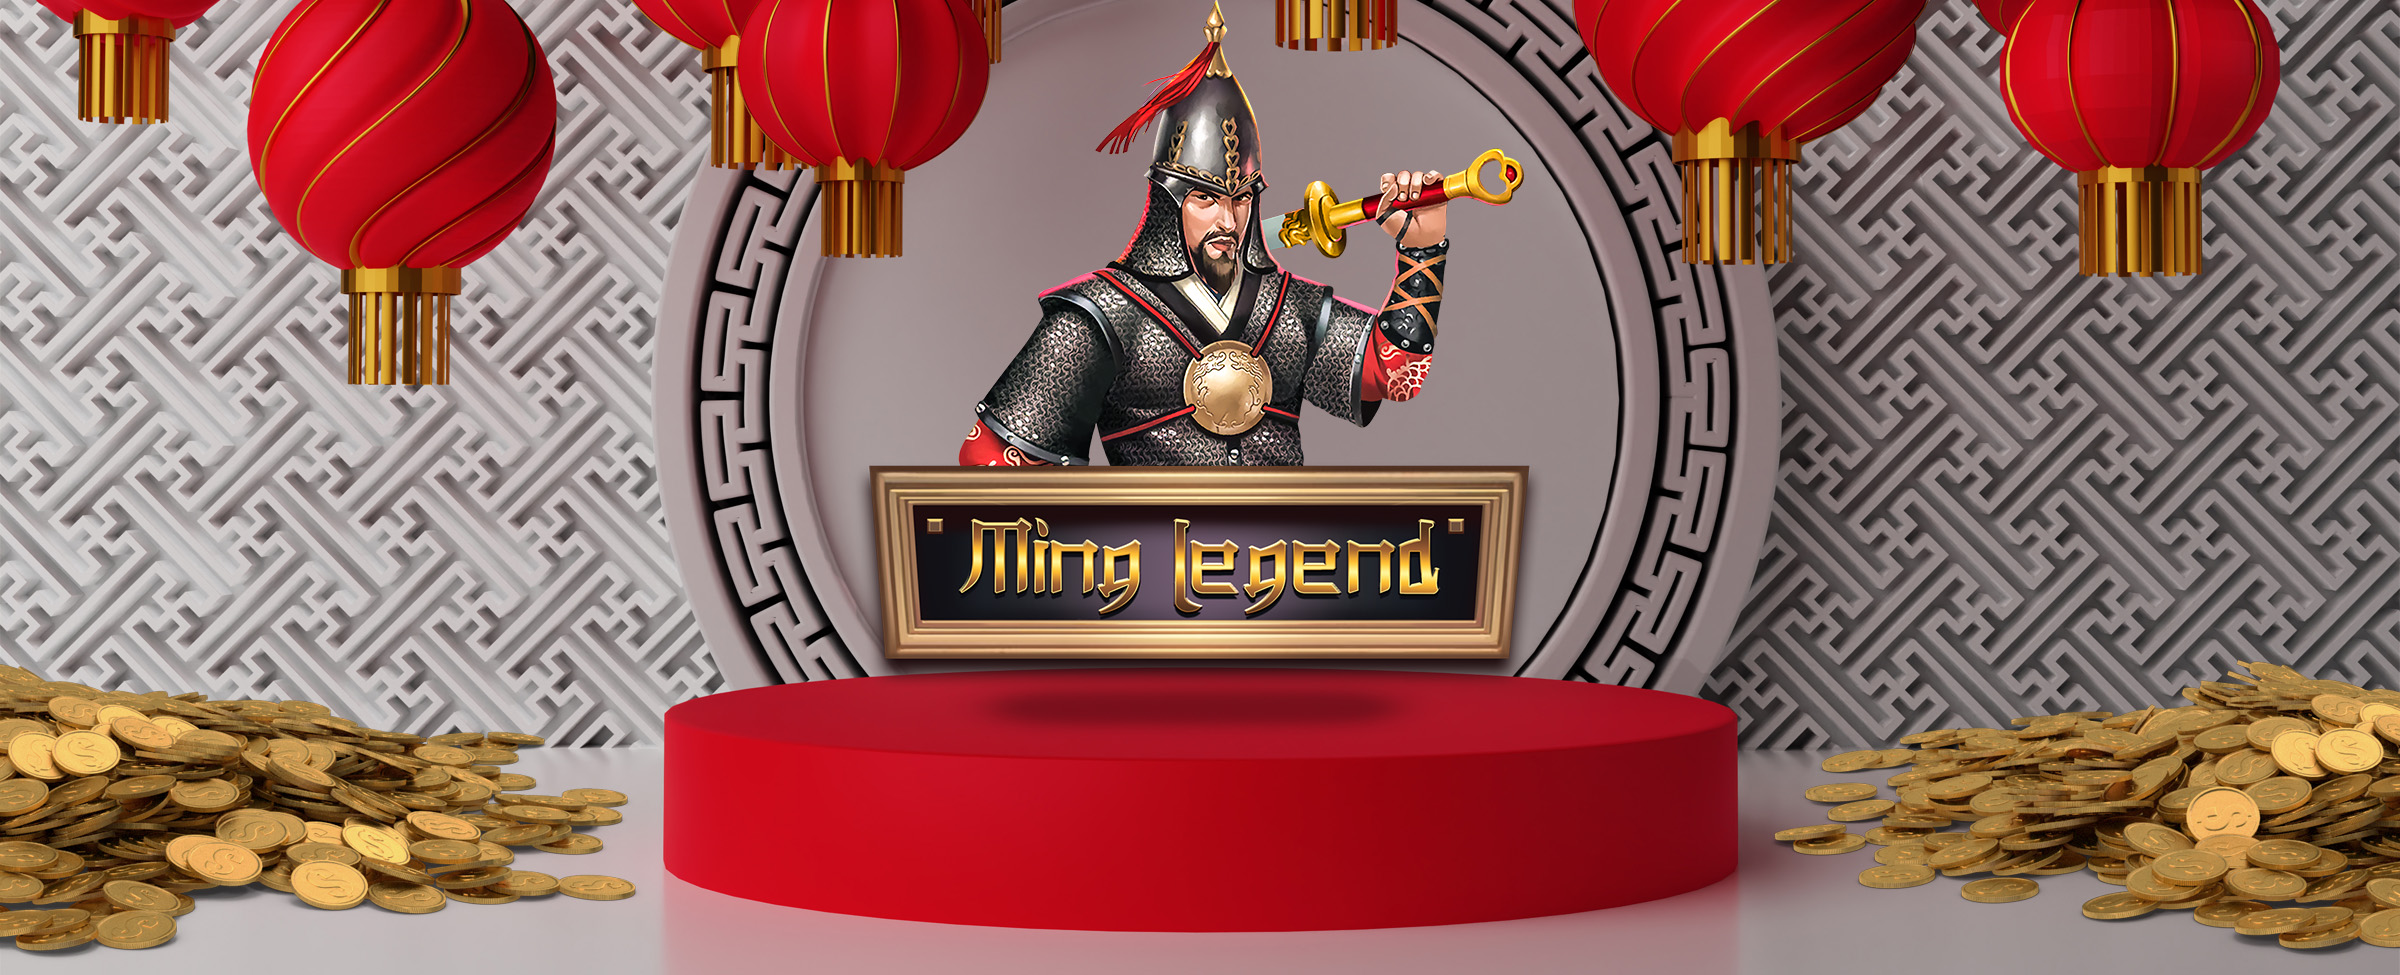 The logo from Cafe Casino’s slot game called Ming Legend appears above a small red stage riser, while on either side, large piles of oversized coins fill the floor, as lanterns appear overhead. In the background, a traditional Chinese patterned wall is seen.